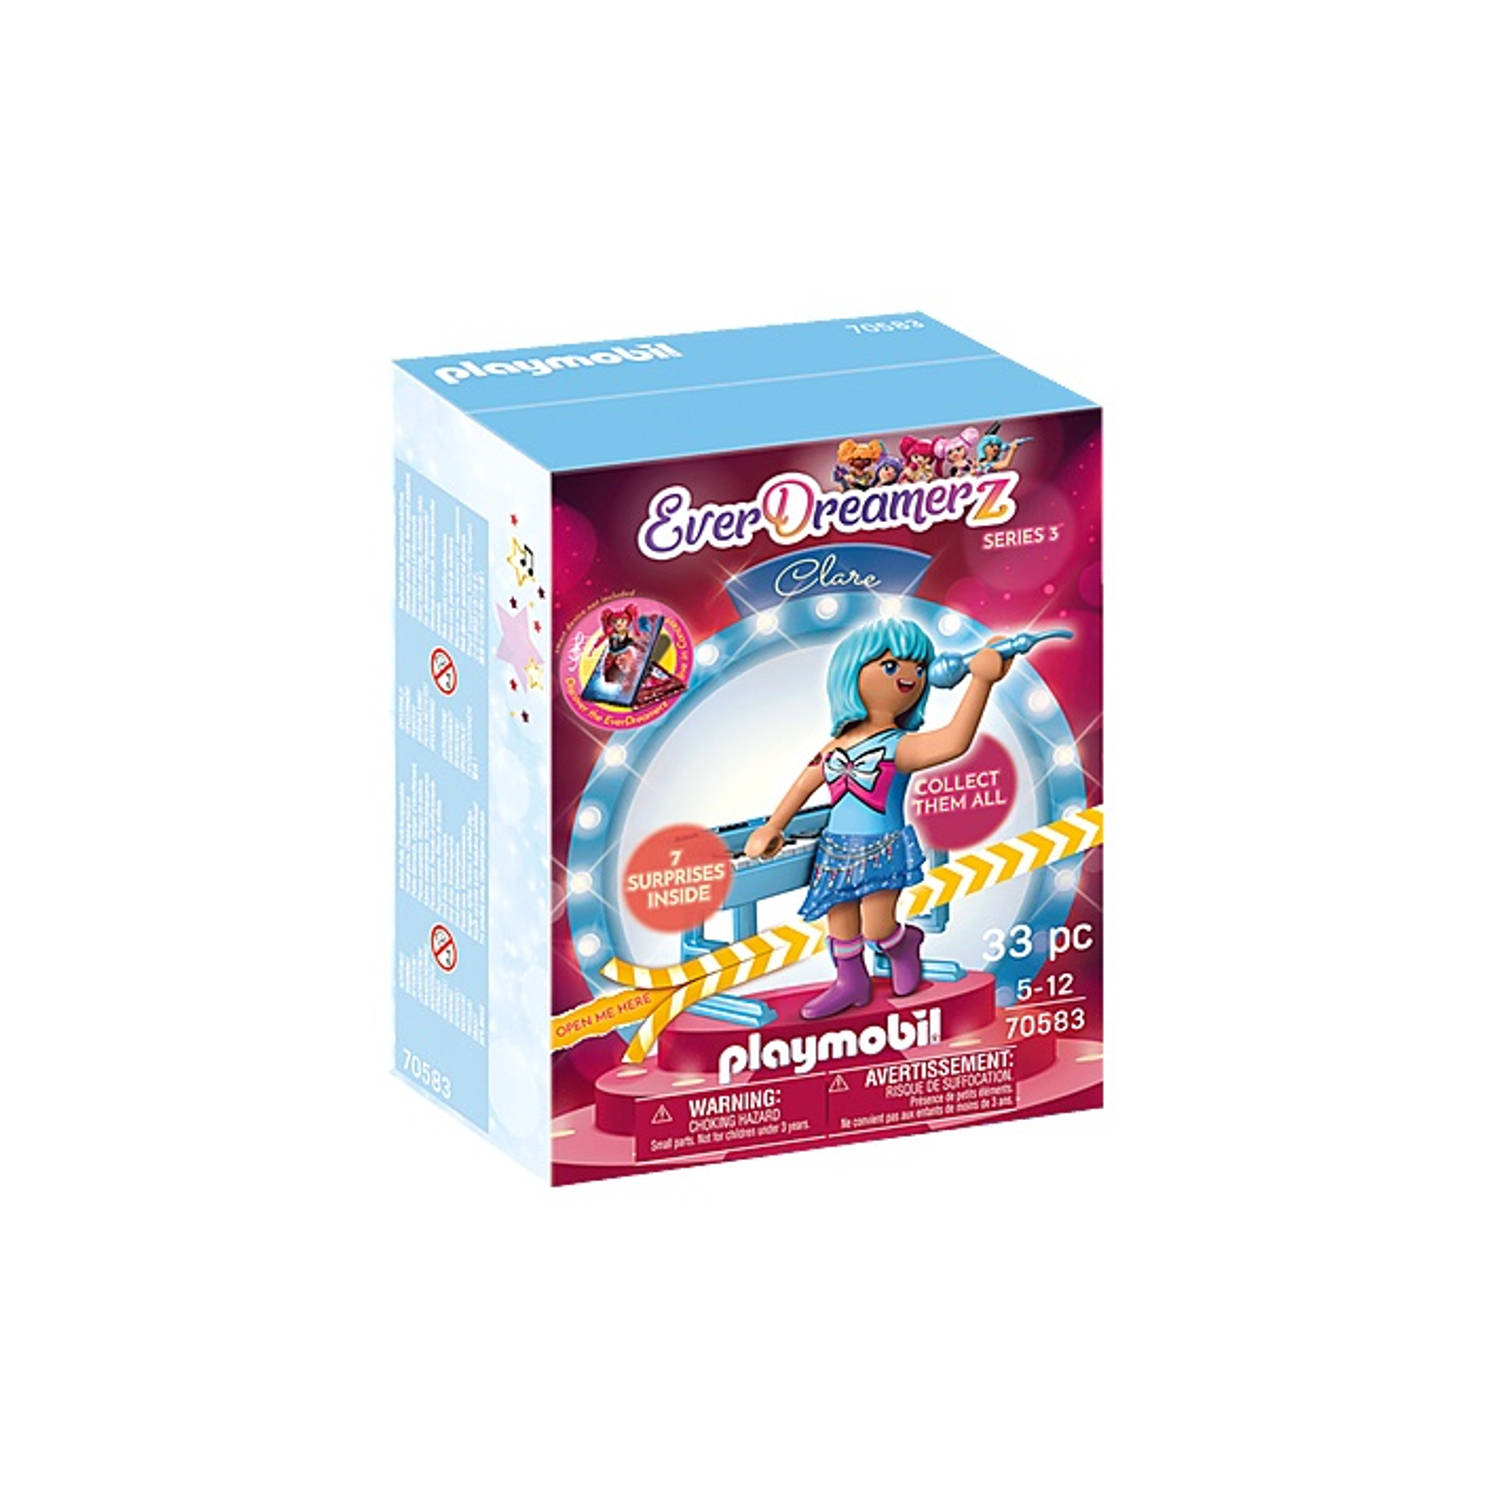 PLAYMOBIL EverDreamerz Clare Music World 33 delig (70583)